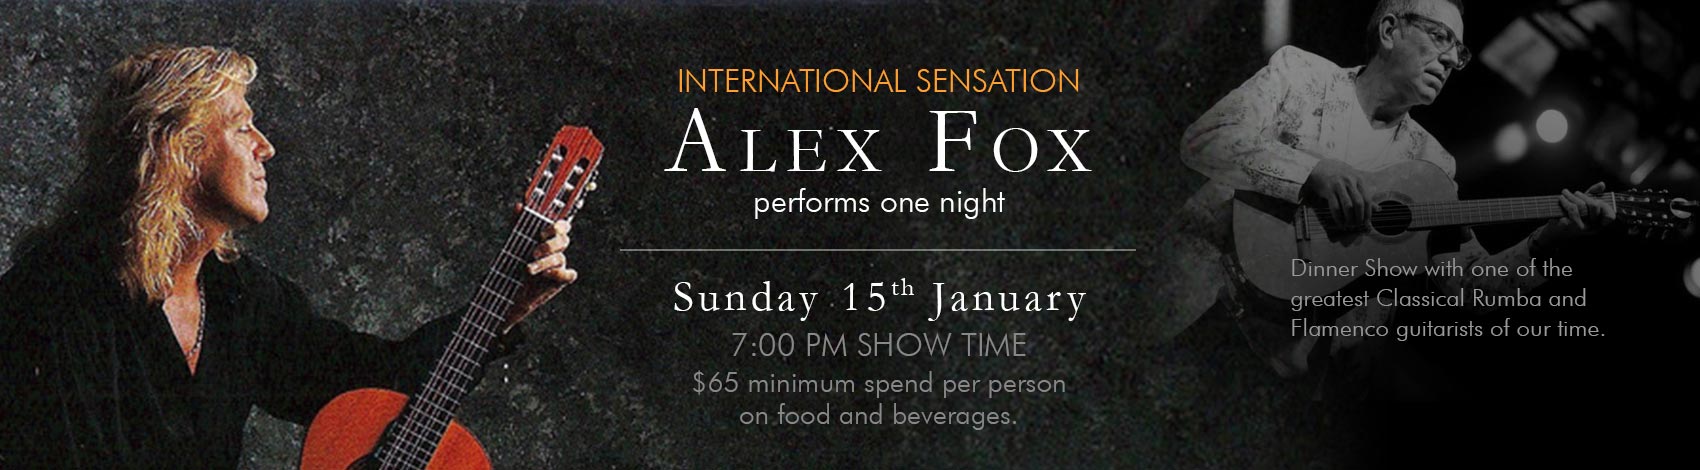 International Sensation Alex Fox performs one night Jauaray 15th 7:00 PM Show Time $65 minimum spend per person  on food and beverages.